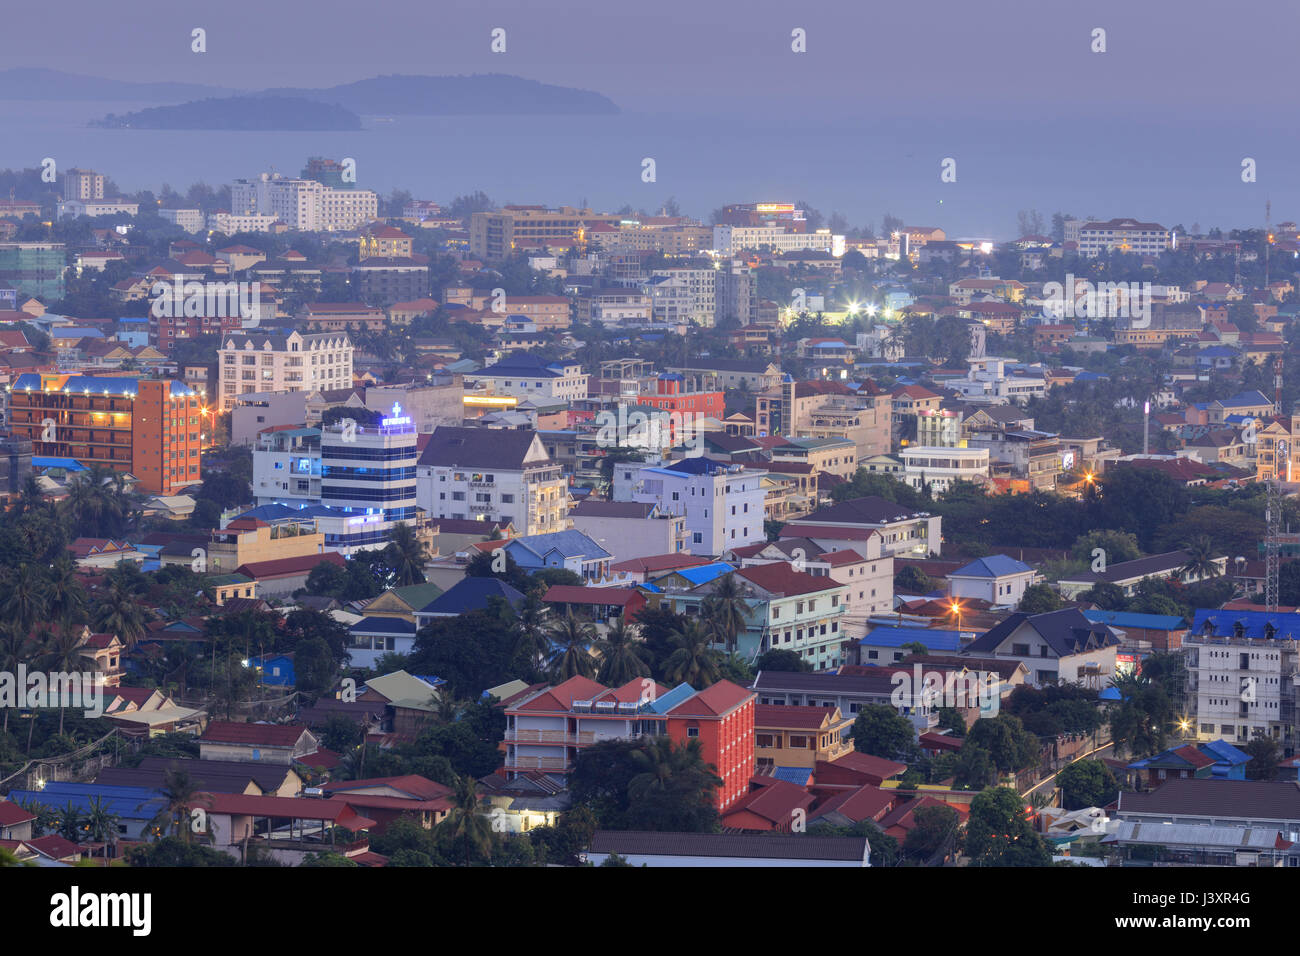 Elevated view of Sihanoukville city in southern Cambodia Stock Photo